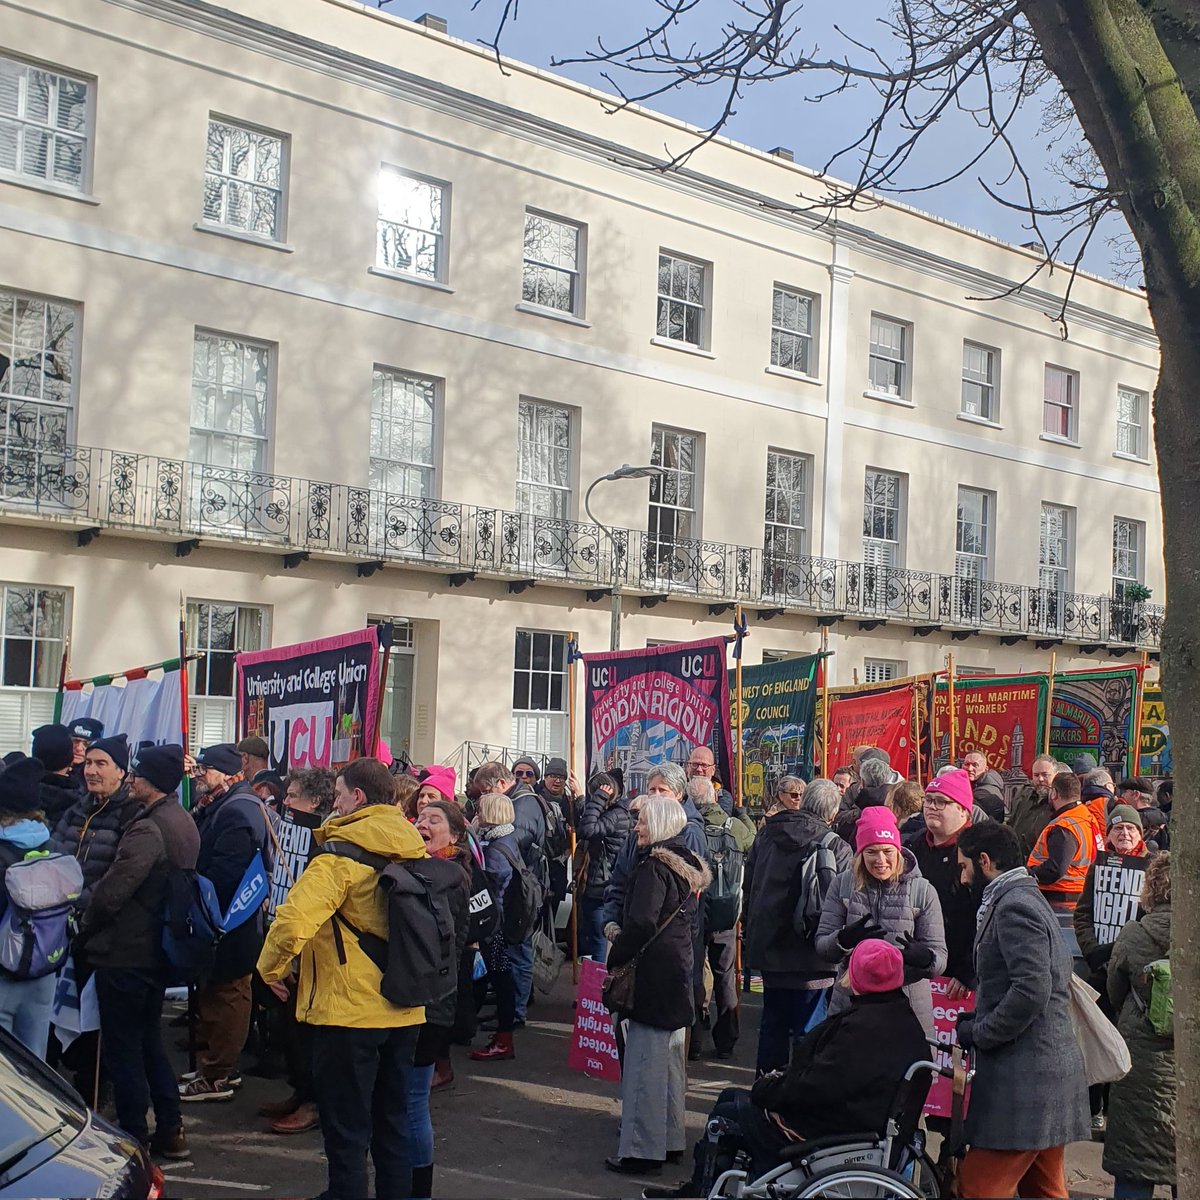 Chesterfield UCU was honoured to march alongside Chesterfield TUC & others at the Protect the right to strike rally in Cheltenham today The rally marks 40 years since GCHQ workers had their right to be union members removed by the Thatcher government #ProtectTheRighttoStrike